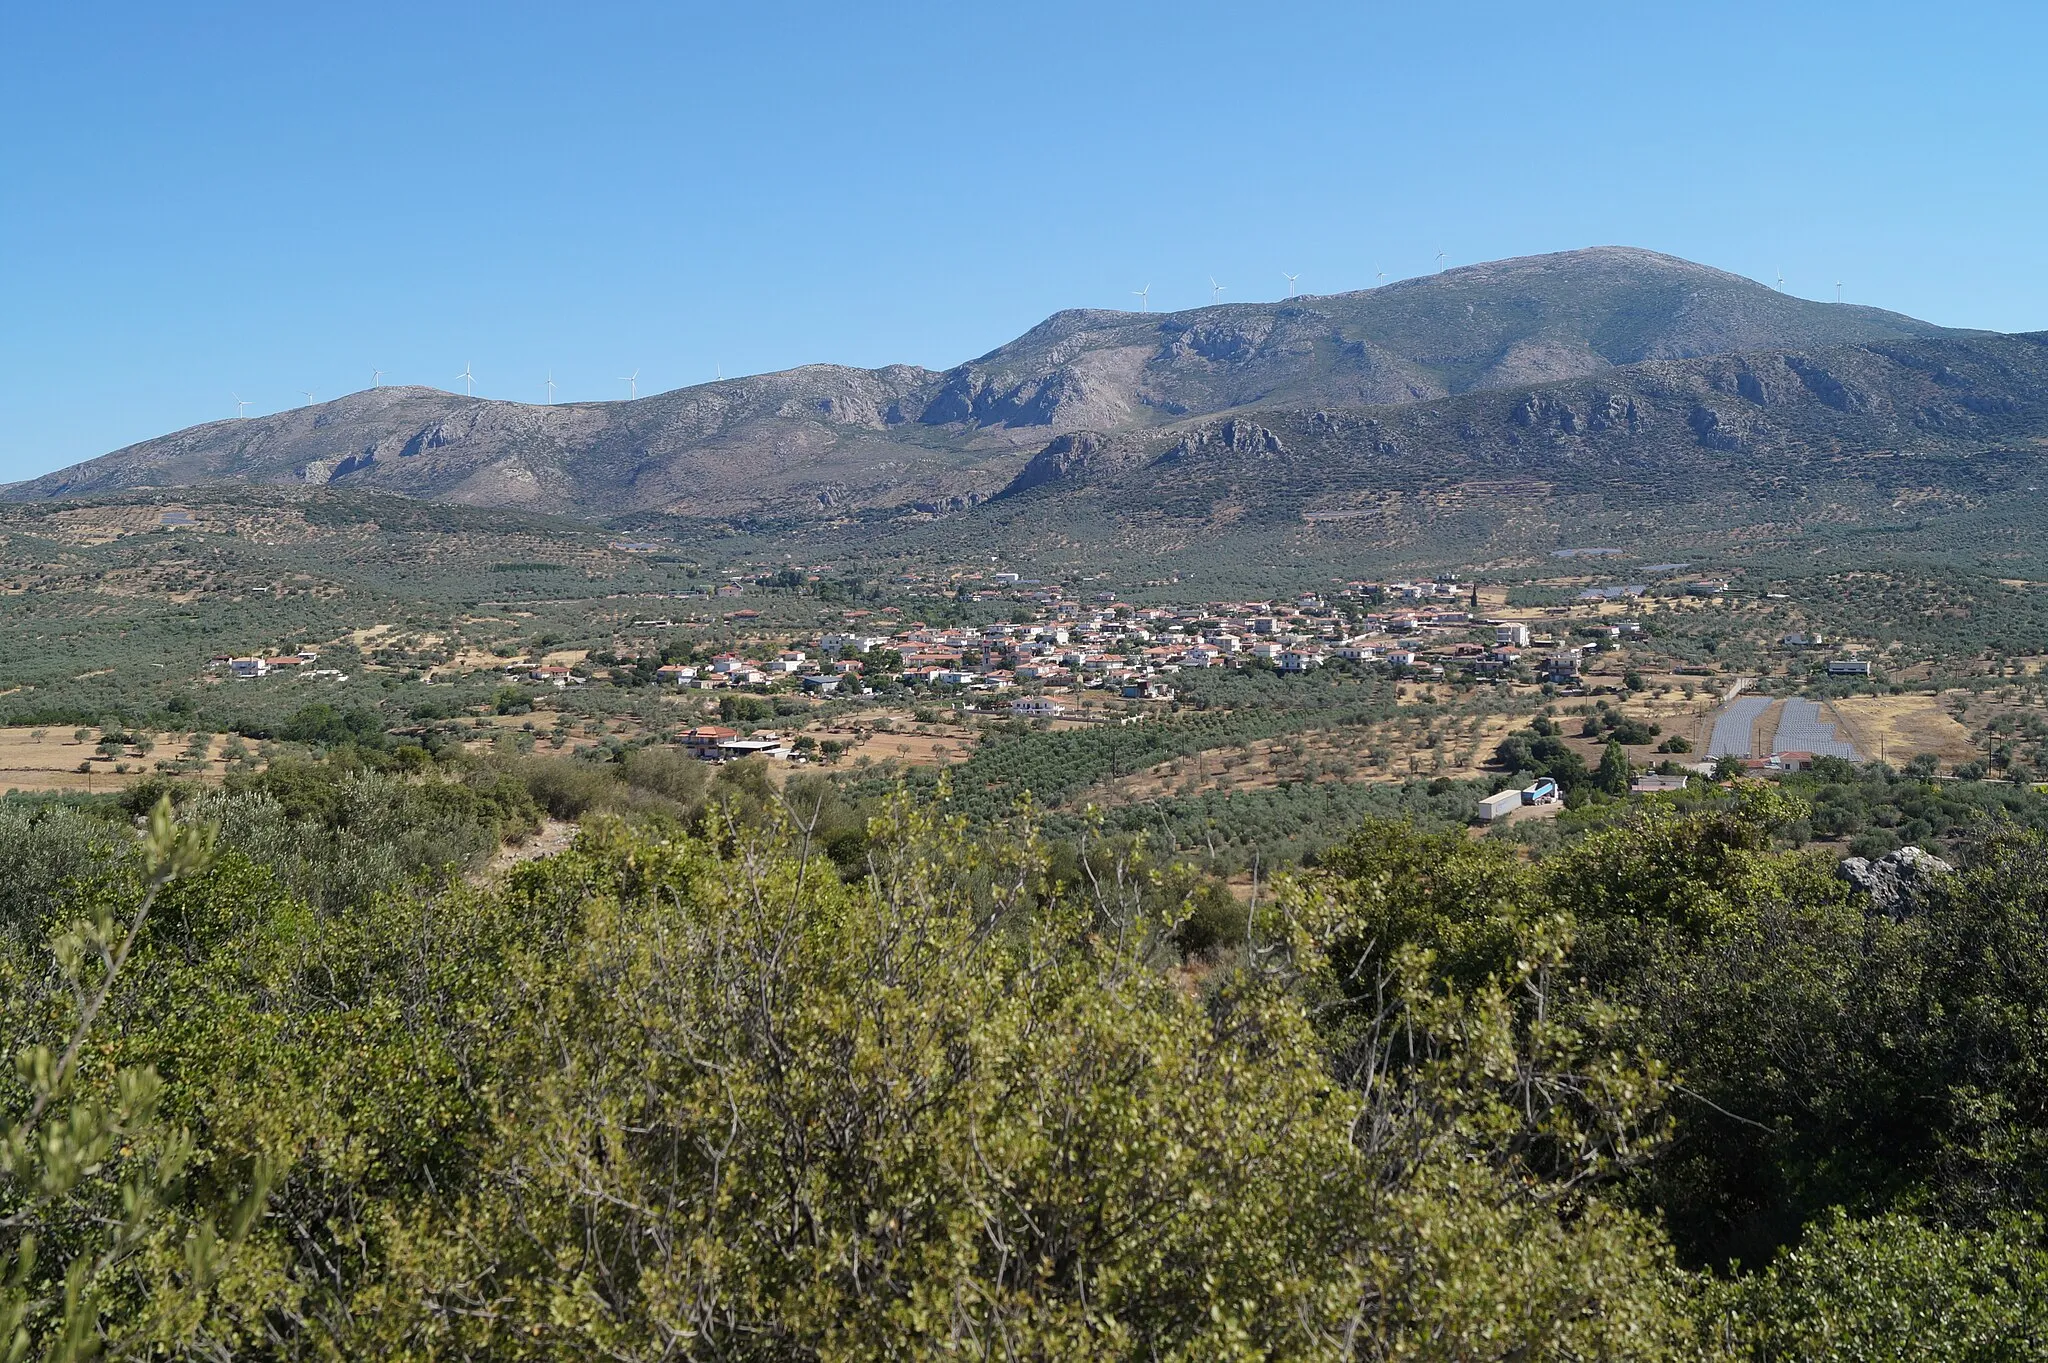 Photo showing: Greece, Argolis, Acropolis of Kazarma: View from the acropolis to the north on the village of Metochi. In the background there is mount Arachneo (Arachnaion) and the promontory Basiovrakhos.